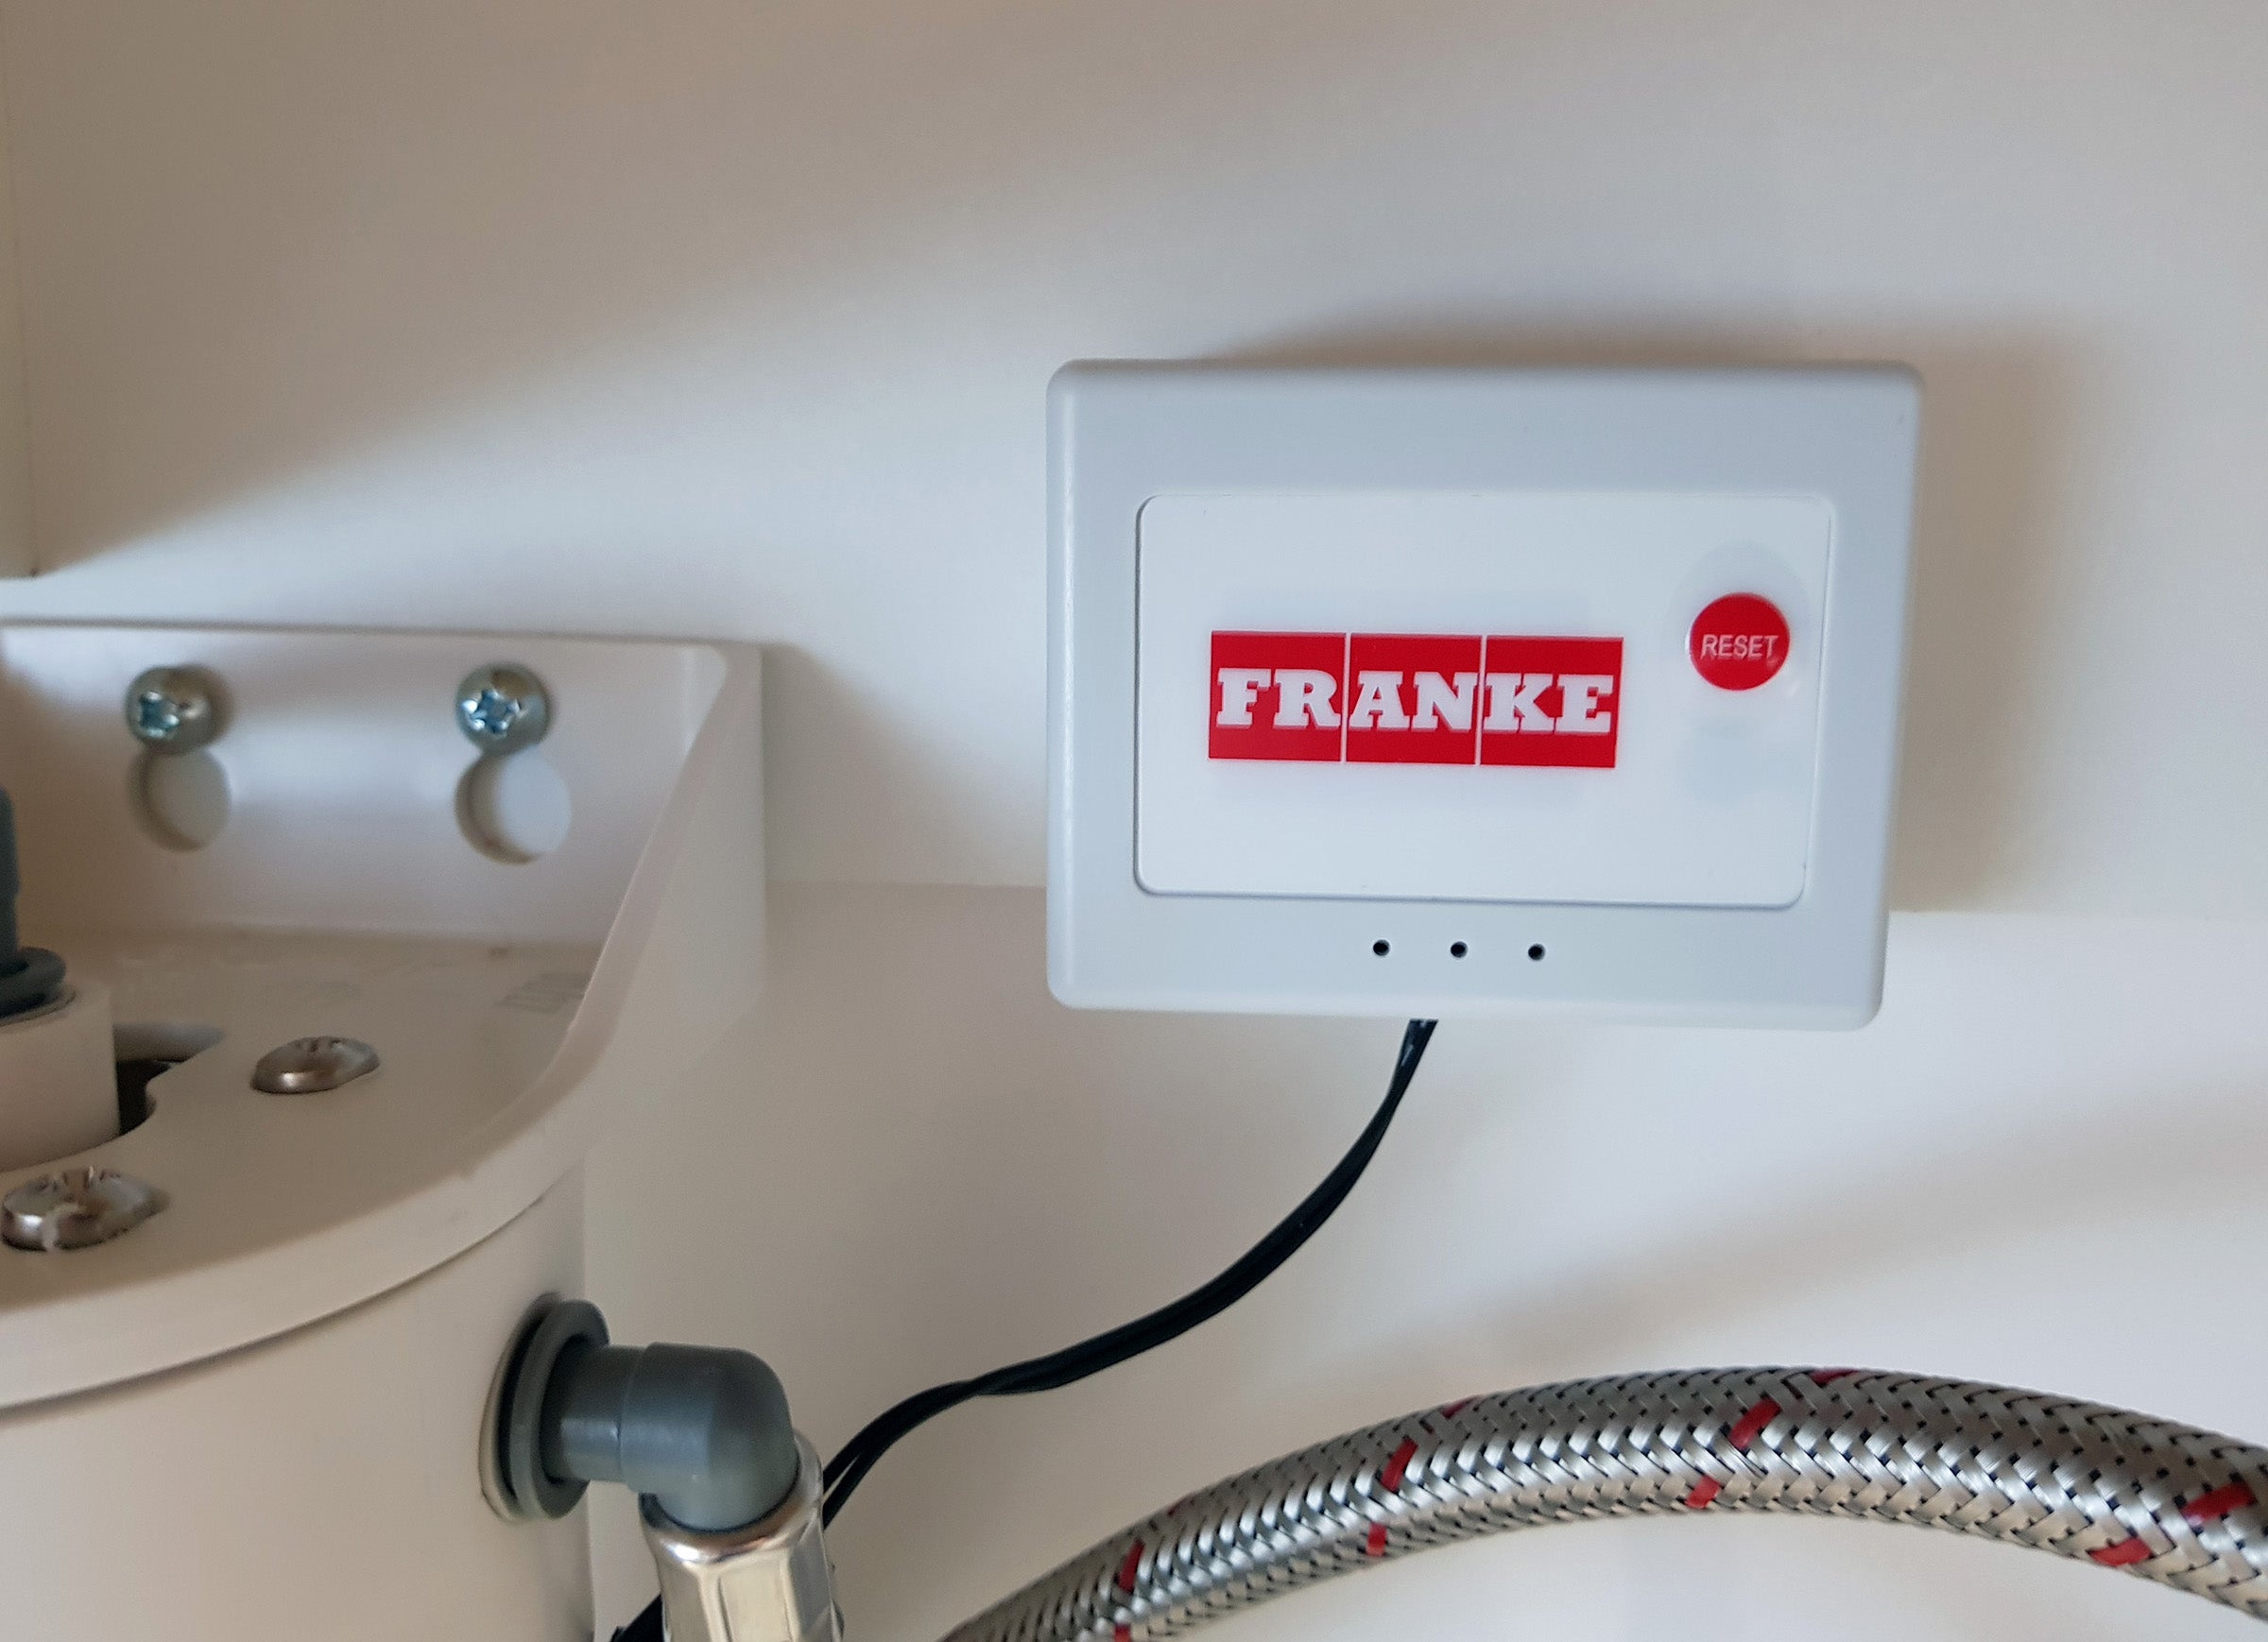 Franke boiling tap control unit with reset button.